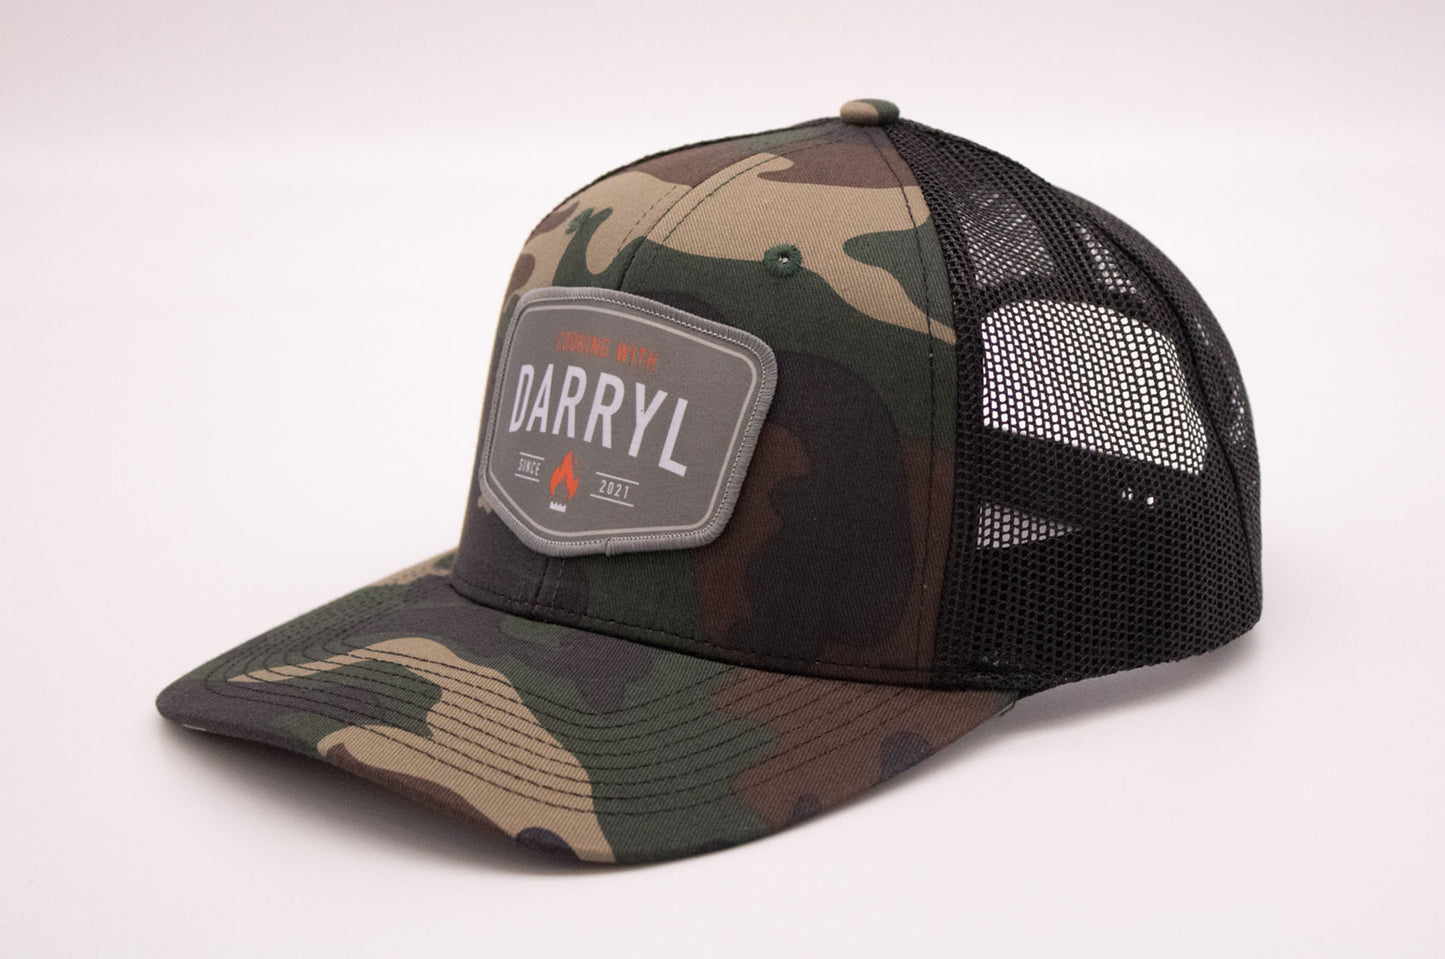 Cooking With Darryl Snapback Trucker Hat - Camo